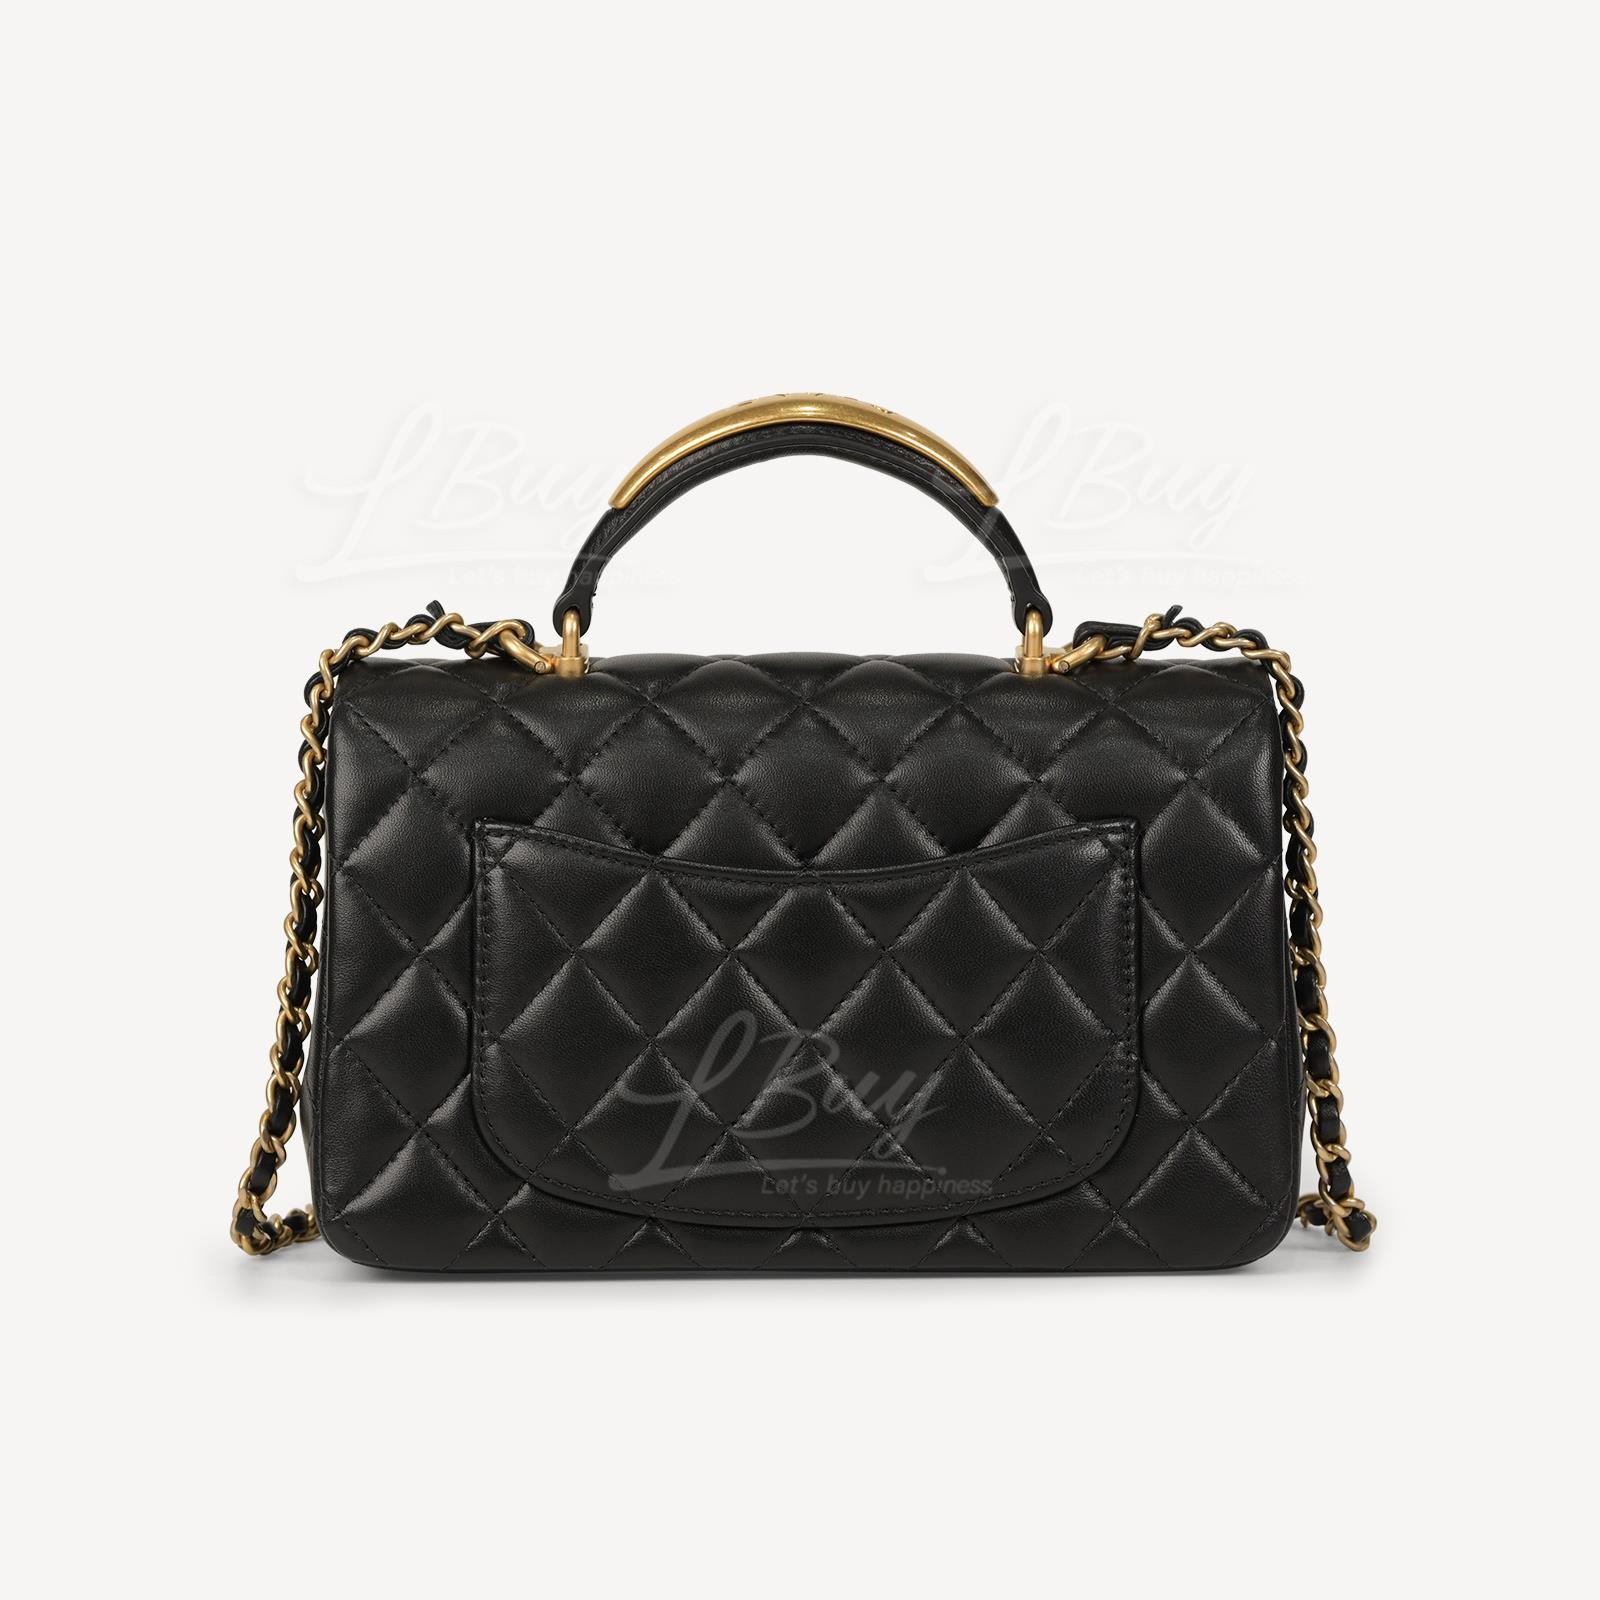 CHANEL-Chanel Black Flap Bag with Gold Tone Metal and Gold 